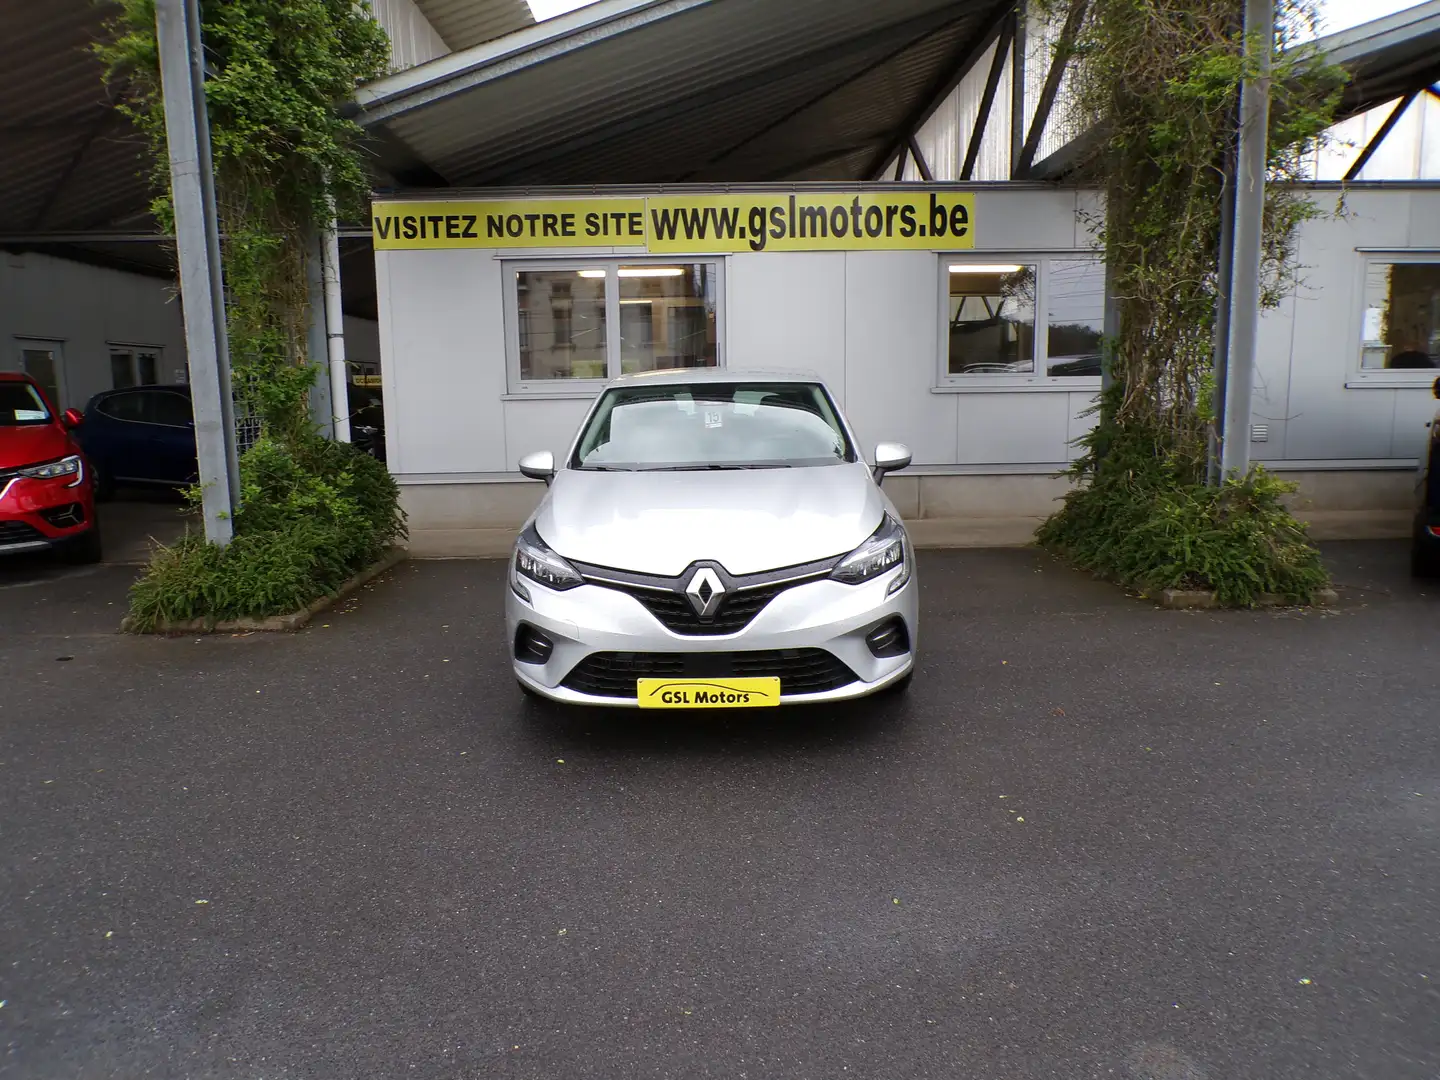 Renault Clio 1.0TCe 90 Gris 04/21 41250km Airco GPS Cruise USB Grey - 2